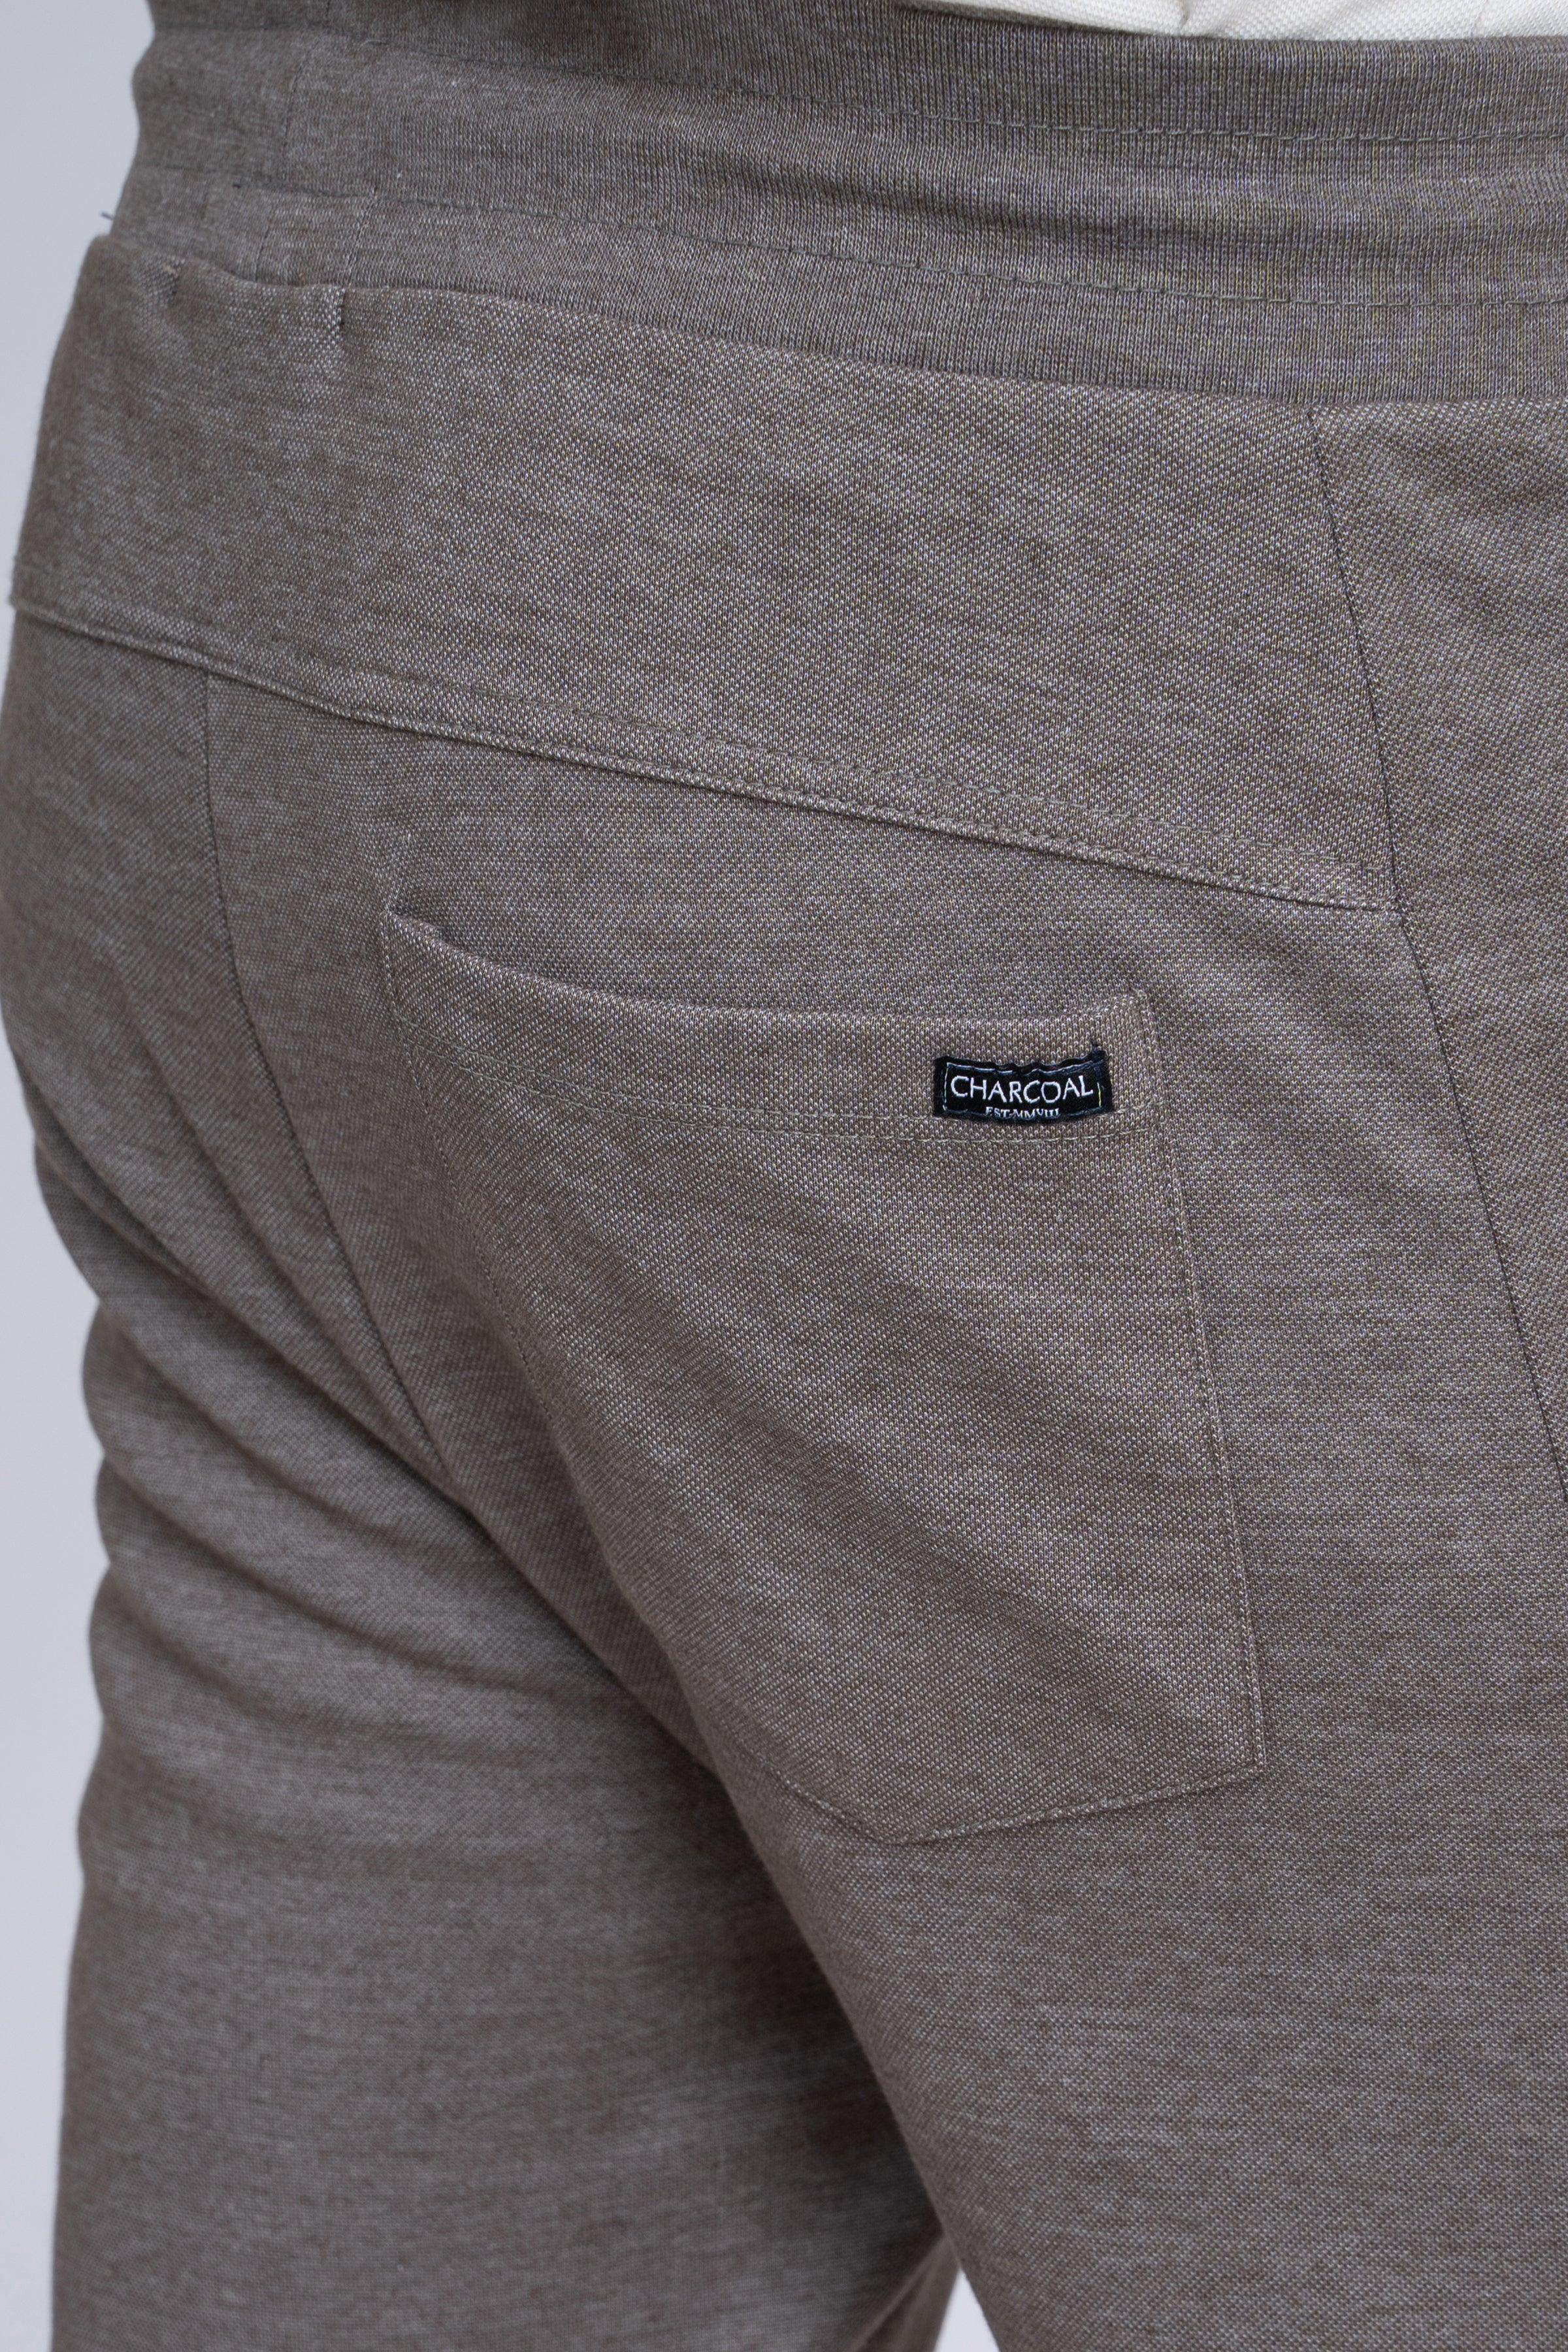 PIQUE INTERLOCK TROUSER OLIVE at Charcoal Clothing